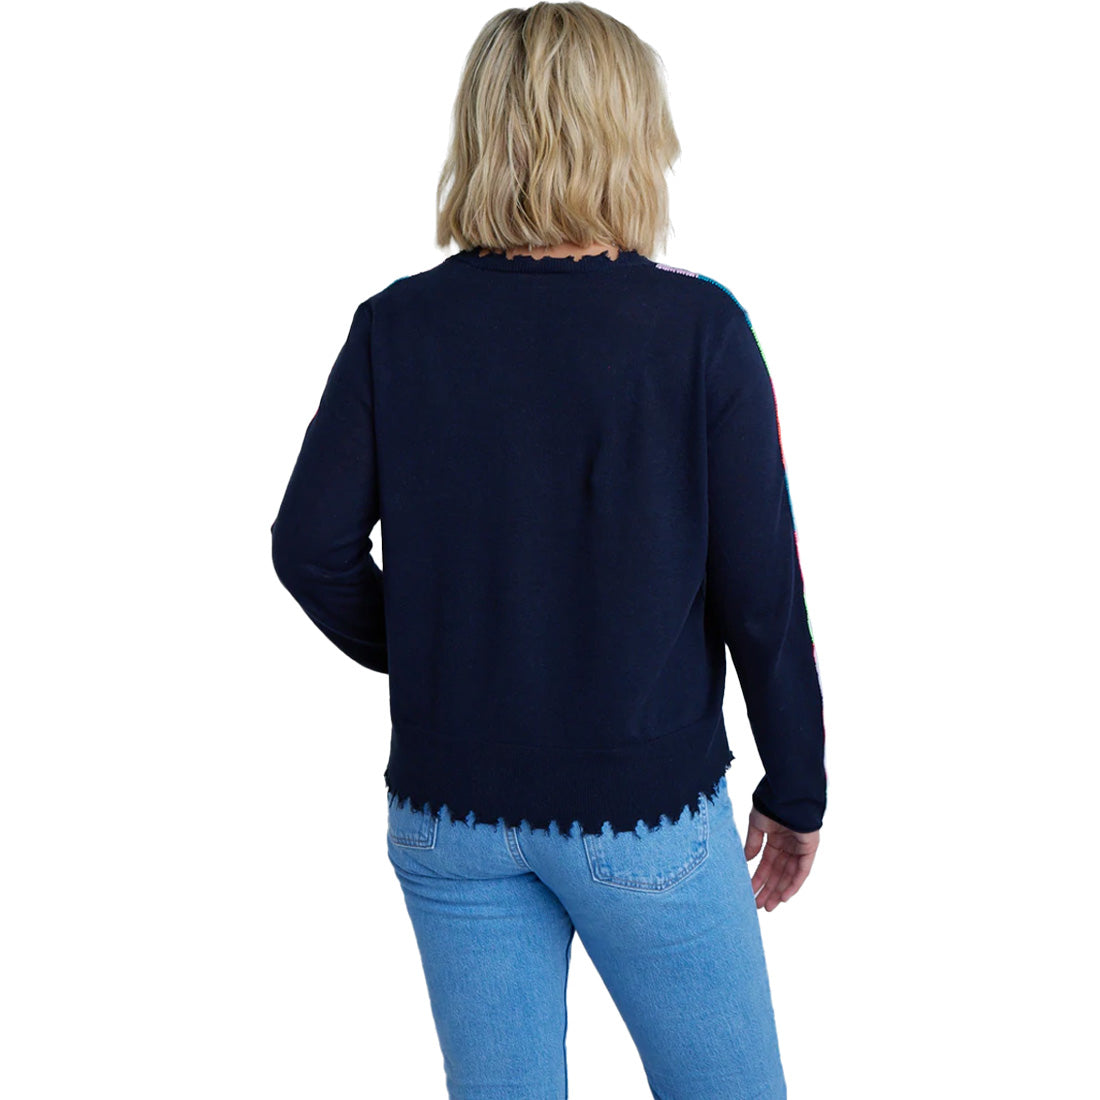 Lisa Todd Make Your Move Sweater - Women's